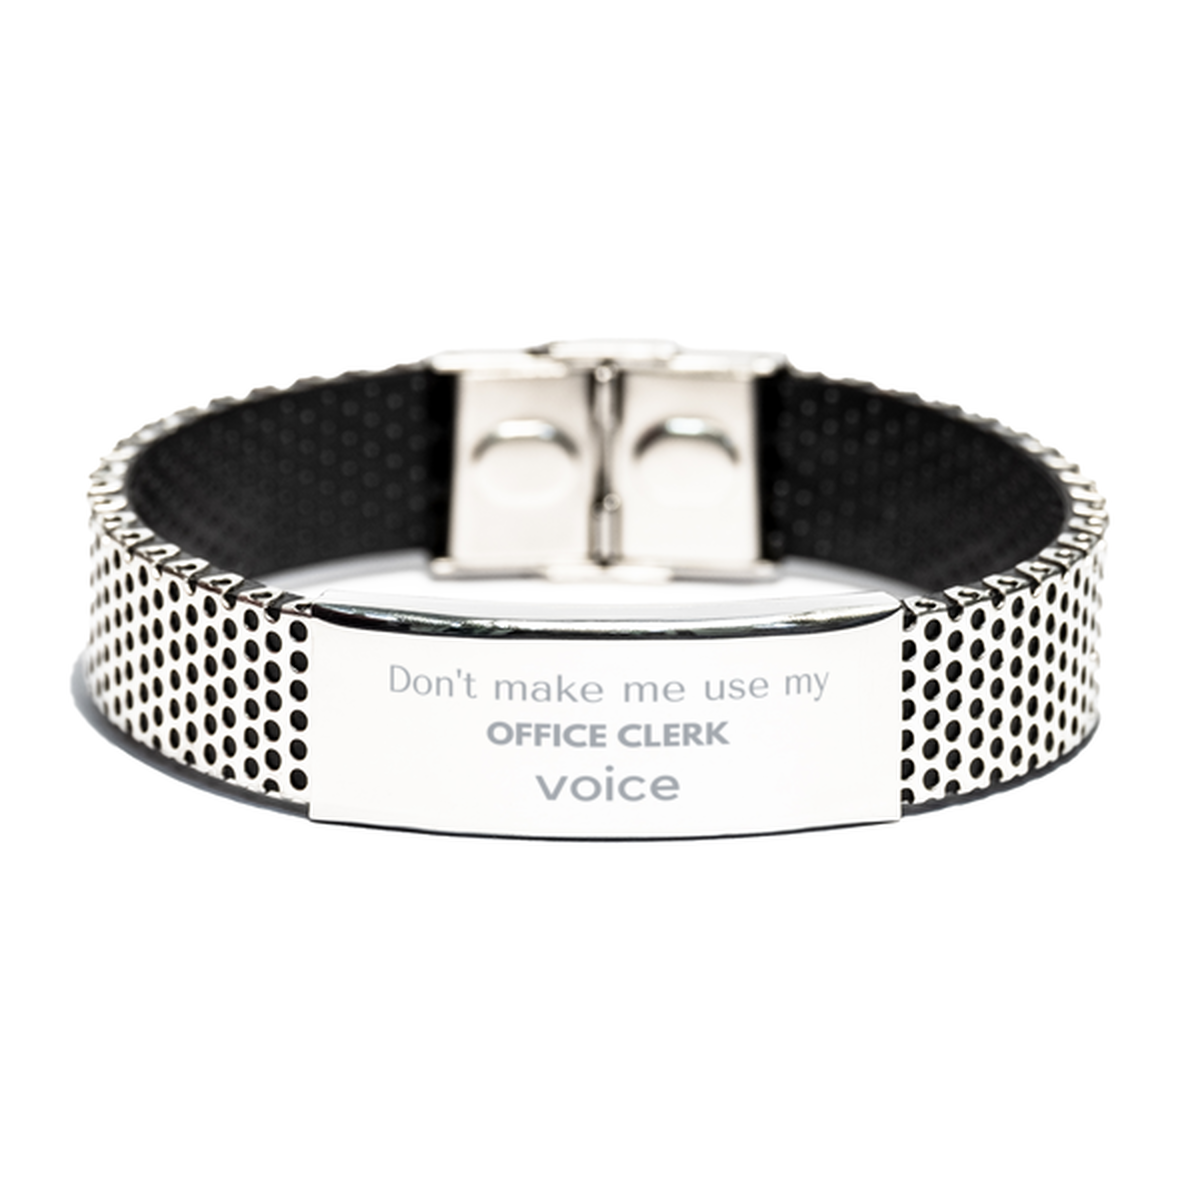 Don't make me use my Office Clerk voice, Sarcasm Office Clerk Gifts, Christmas Office Clerk Stainless Steel Bracelet Birthday Unique Gifts For Office Clerk Coworkers, Men, Women, Colleague, Friends